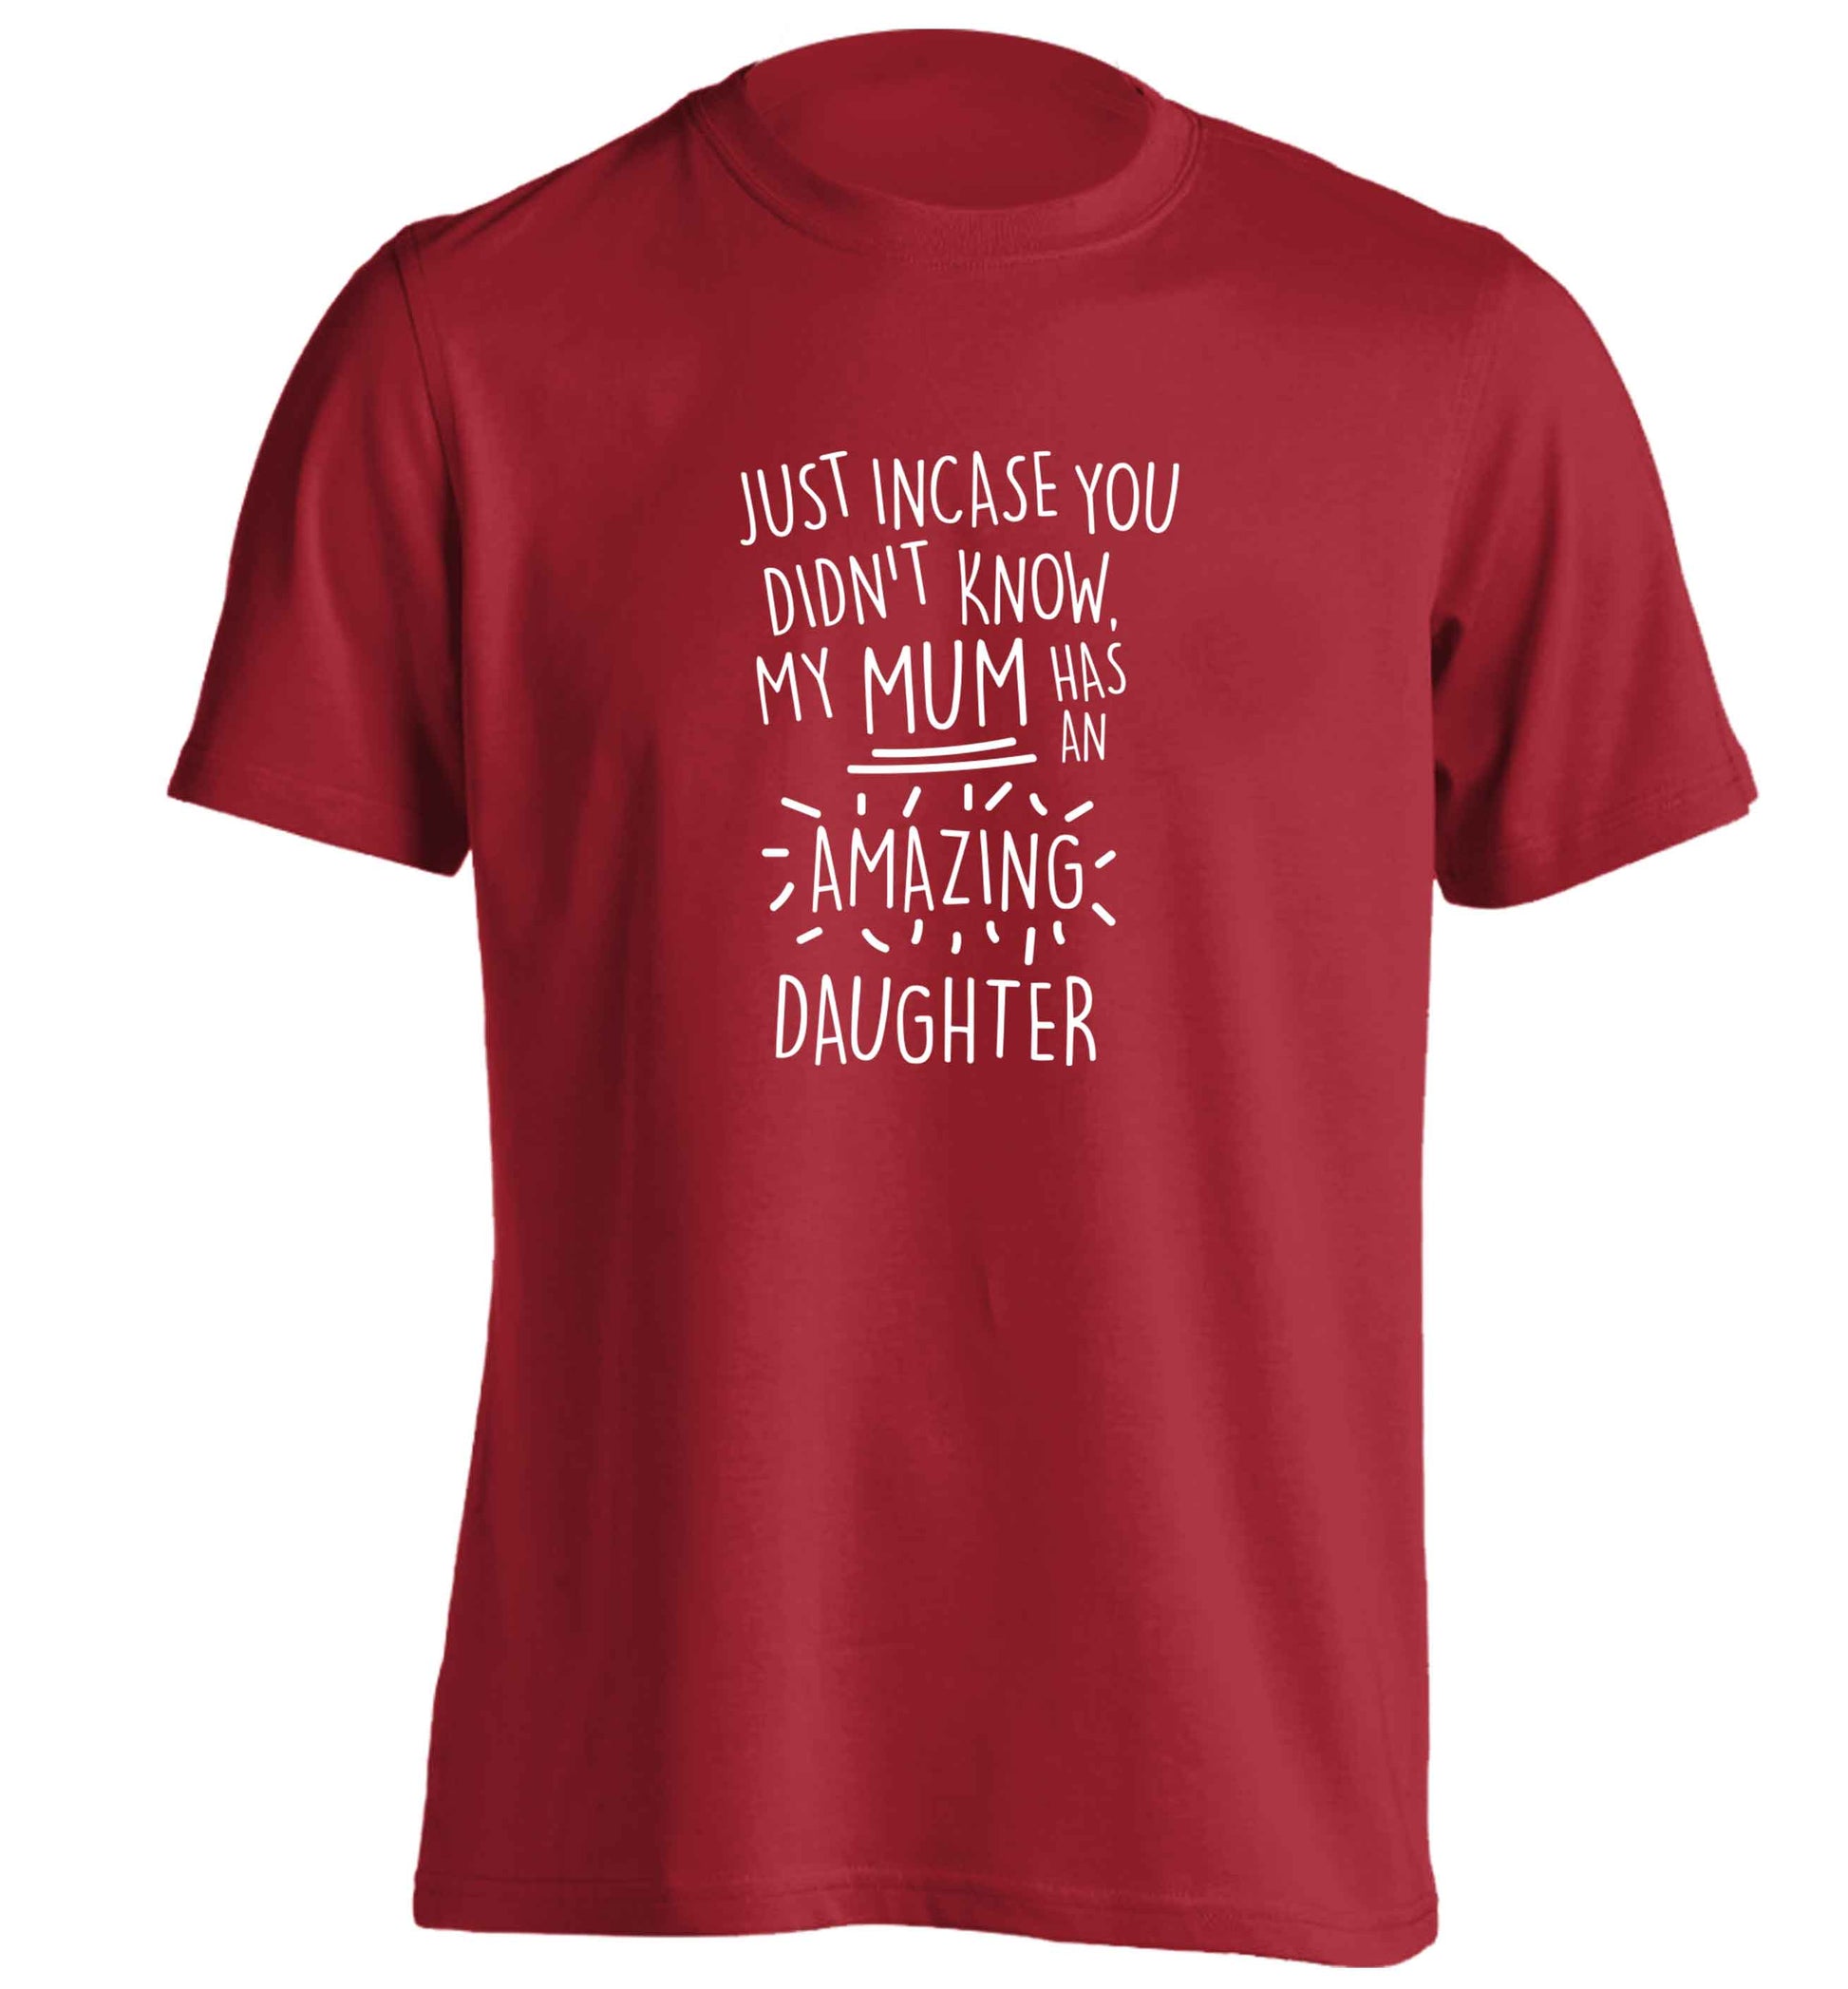 Just incase you didn't know my mum has an amazing daughter adults unisex red Tshirt 2XL